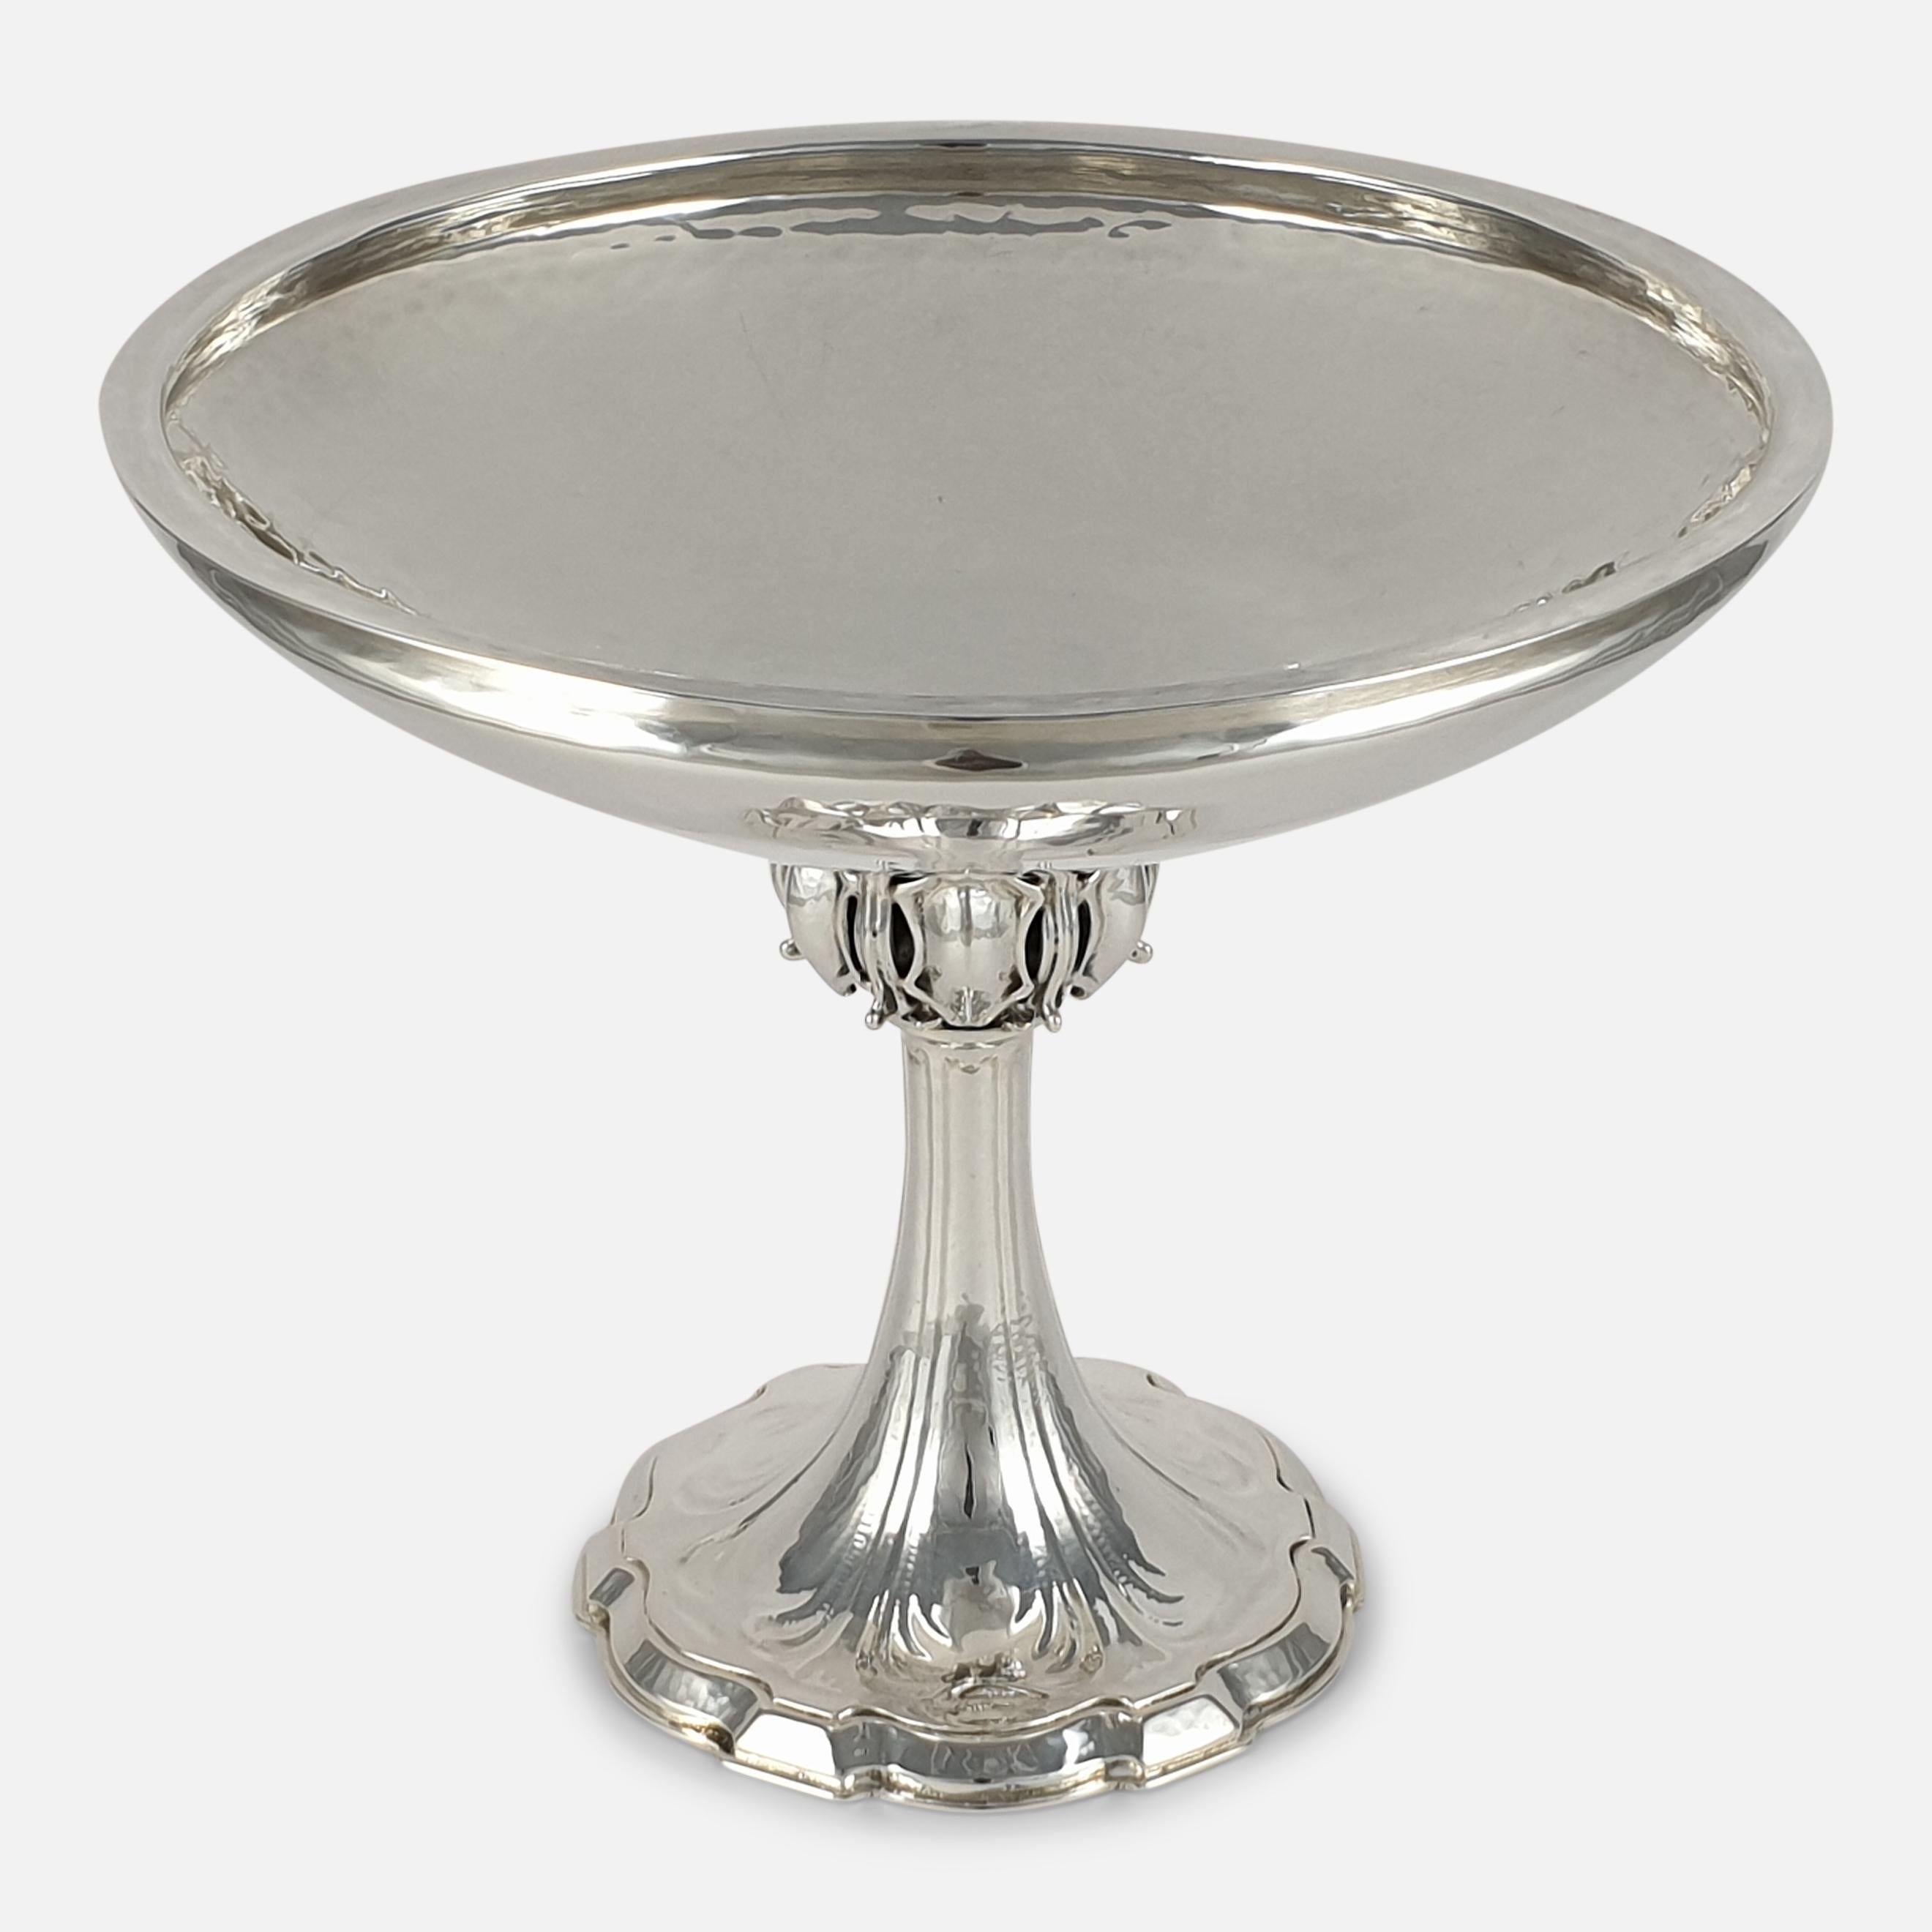 British Arts & Crafts Sterling Silver Tazza, Omar Ramsden, London, 1926 For Sale